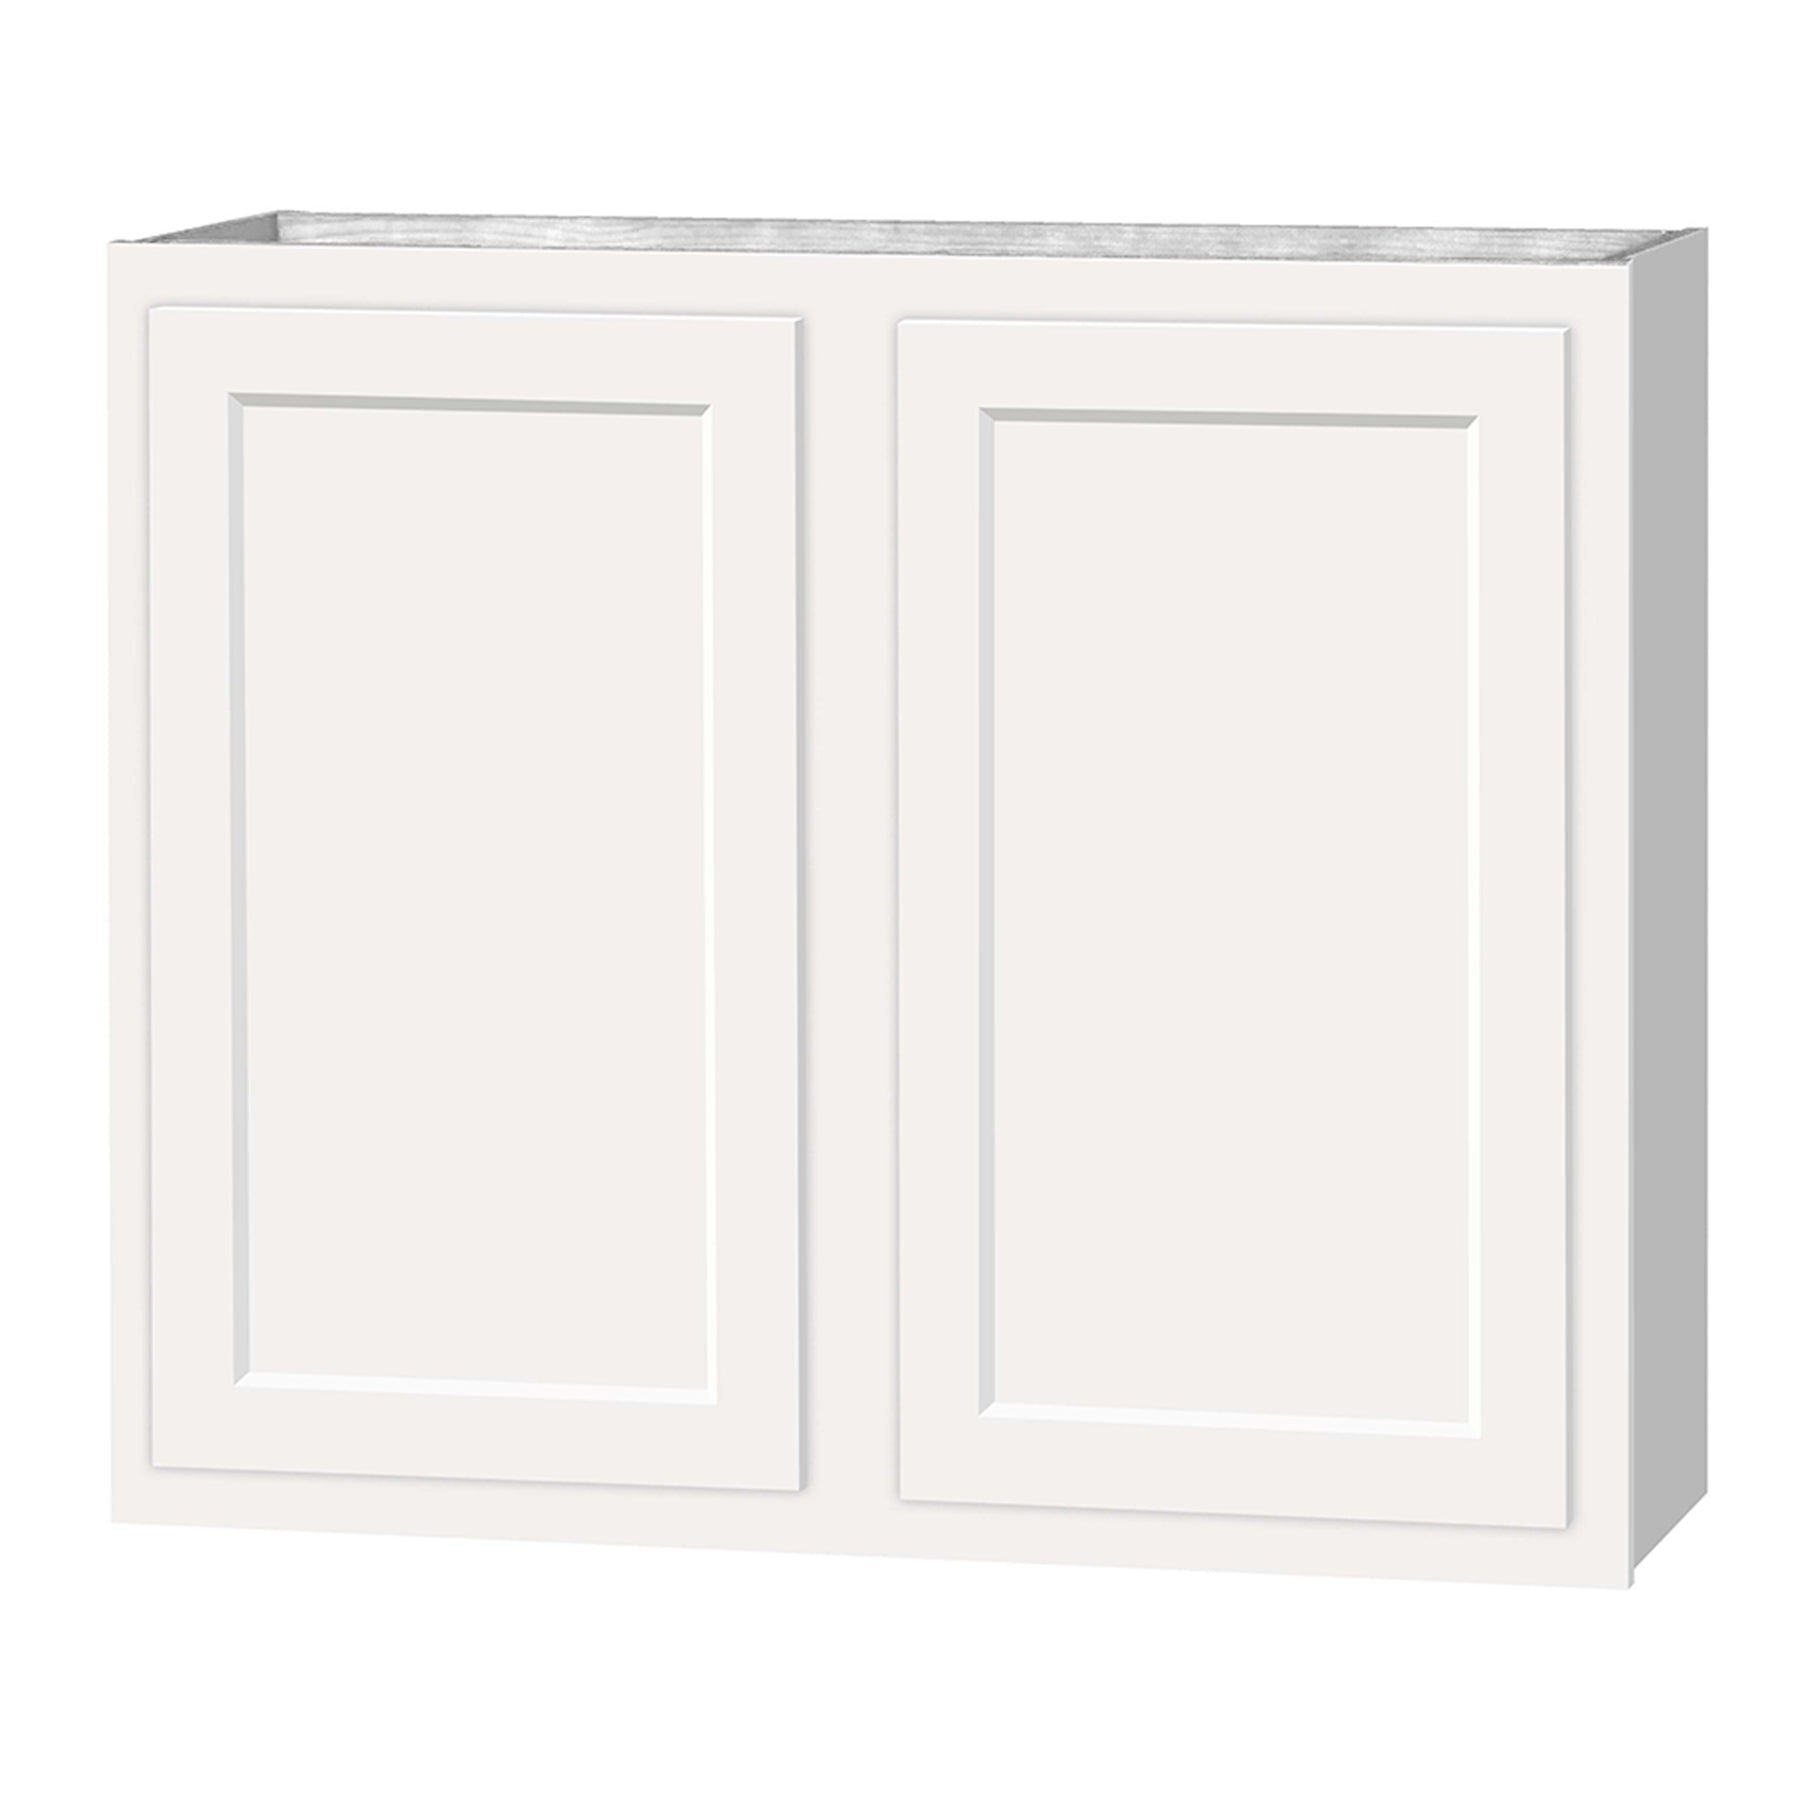 30 inch Wall Cabinets - Dwhite Shaker - 36 Inch W x 30 Inch H x 12 Inch D